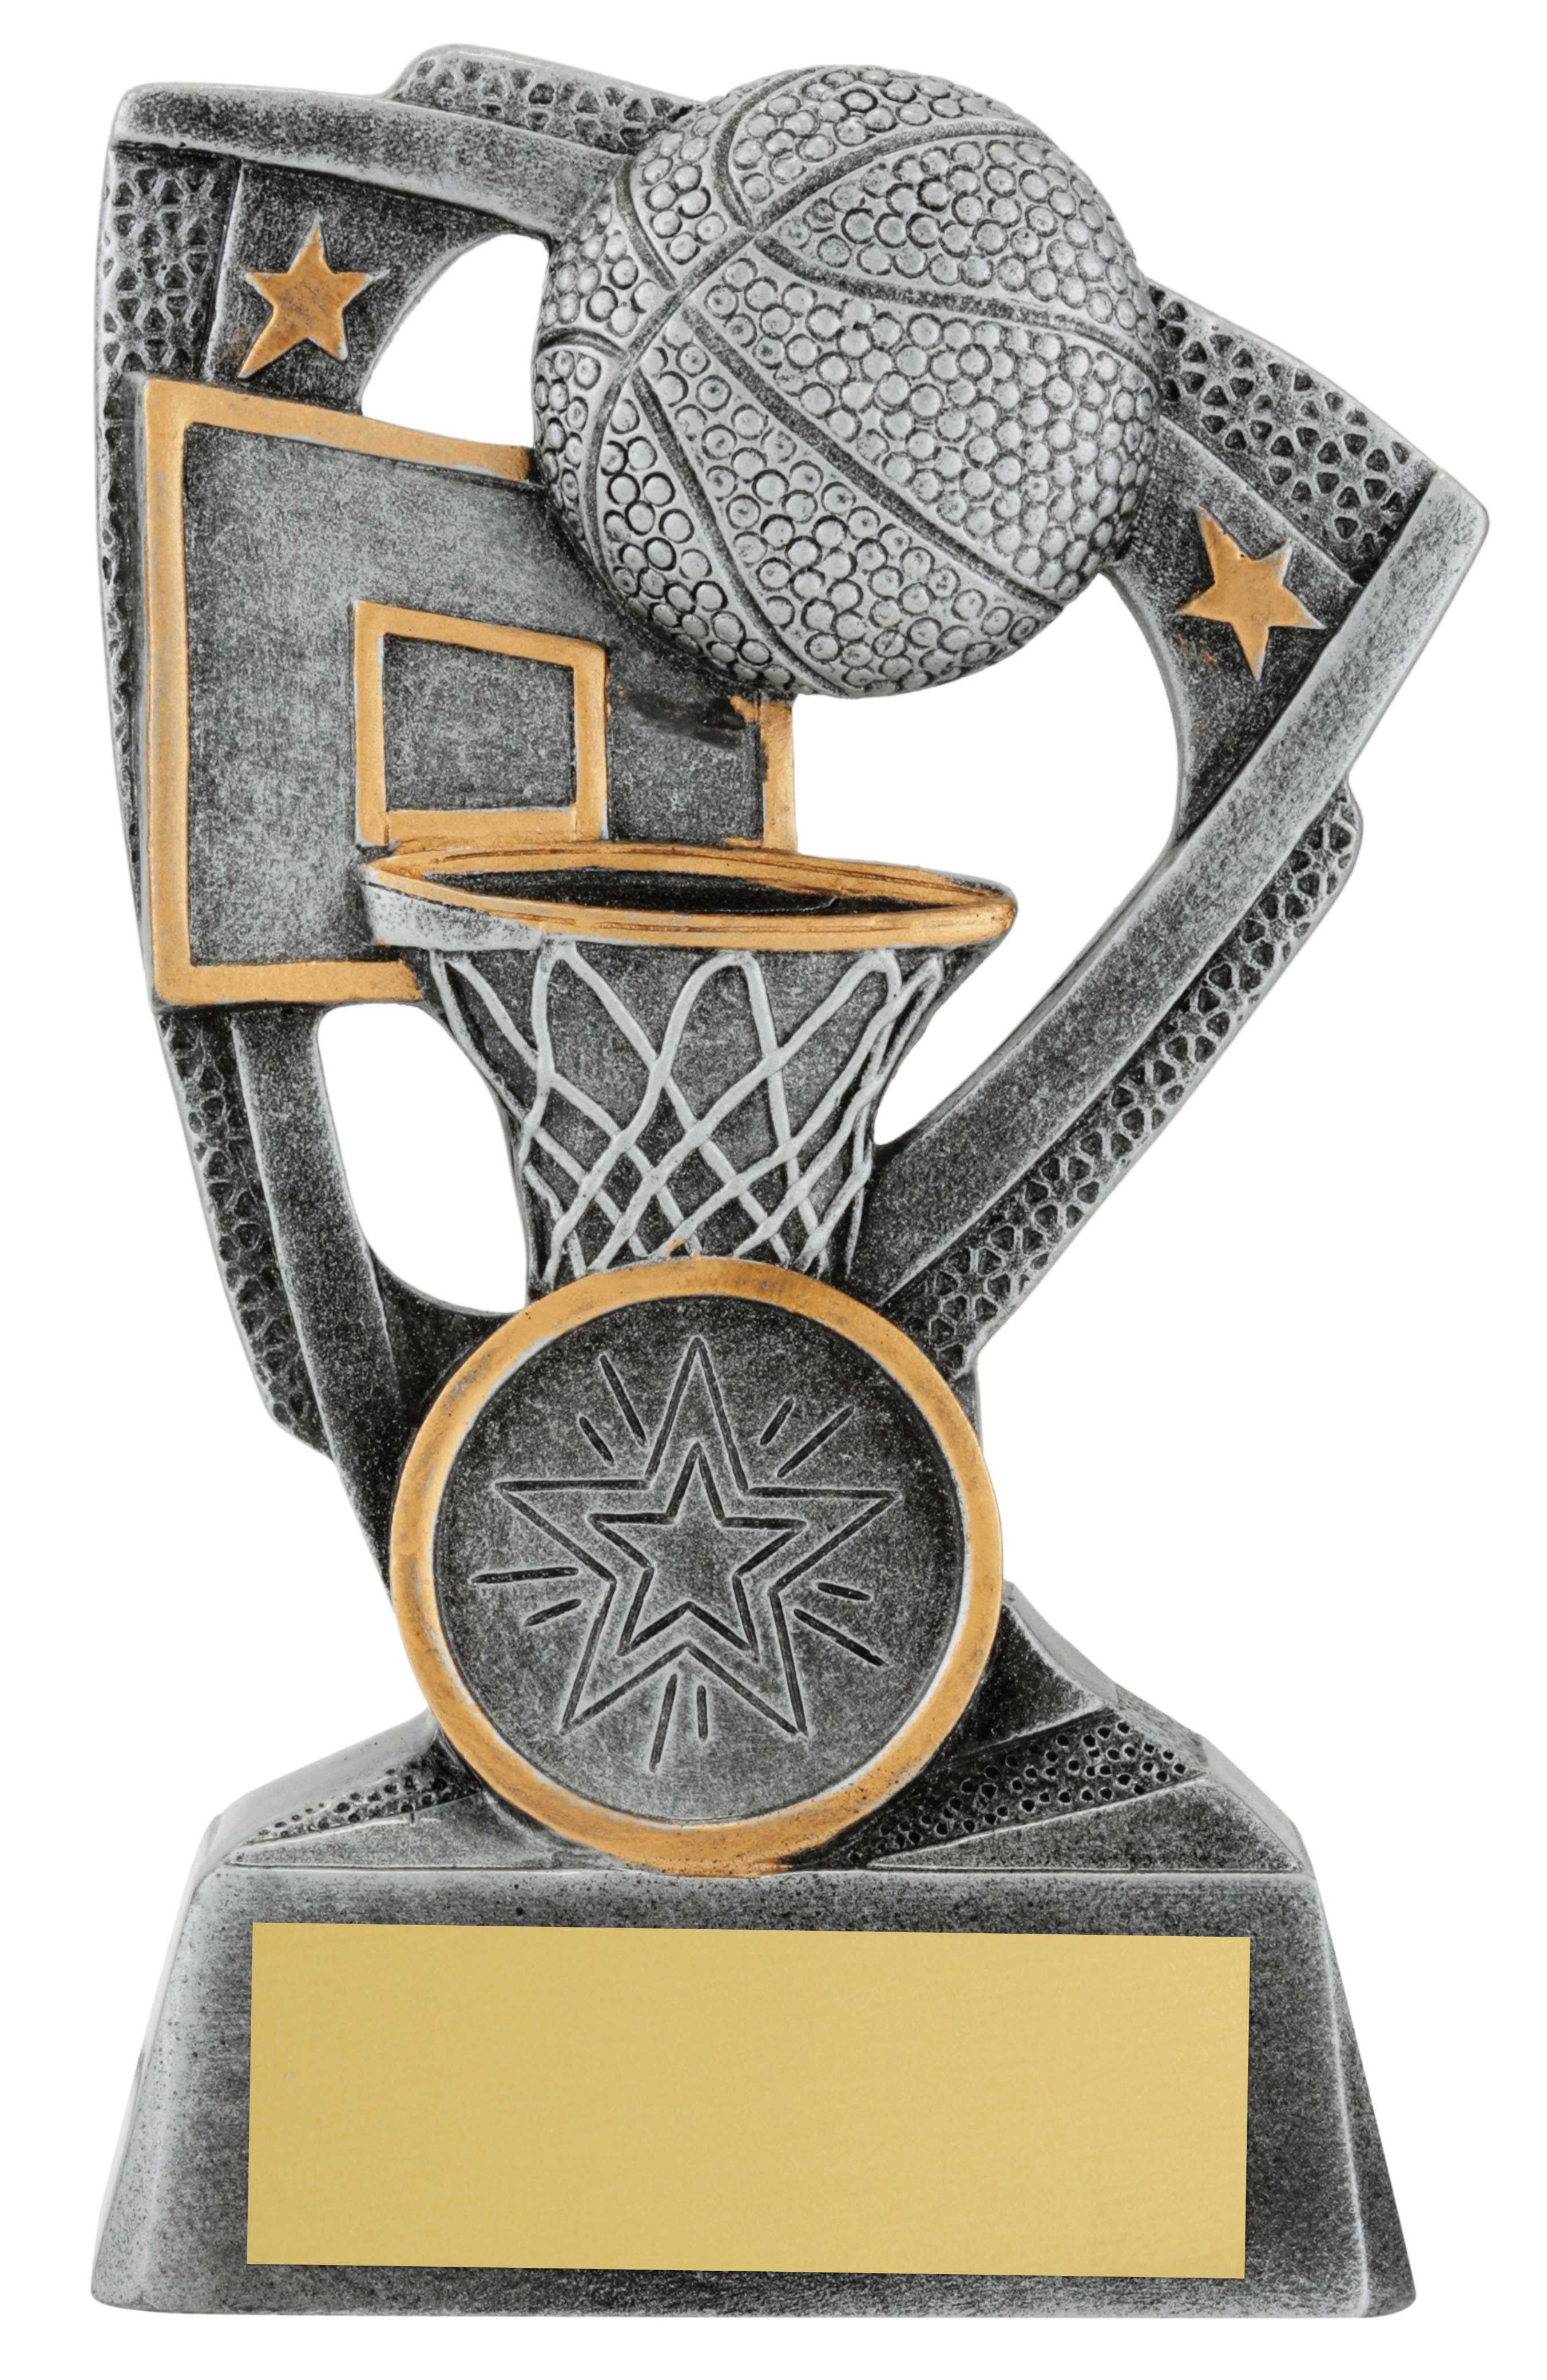 Basketball Player Plaques Make A Great Award & Trophy You Can Add Your Own Free Engraving. 